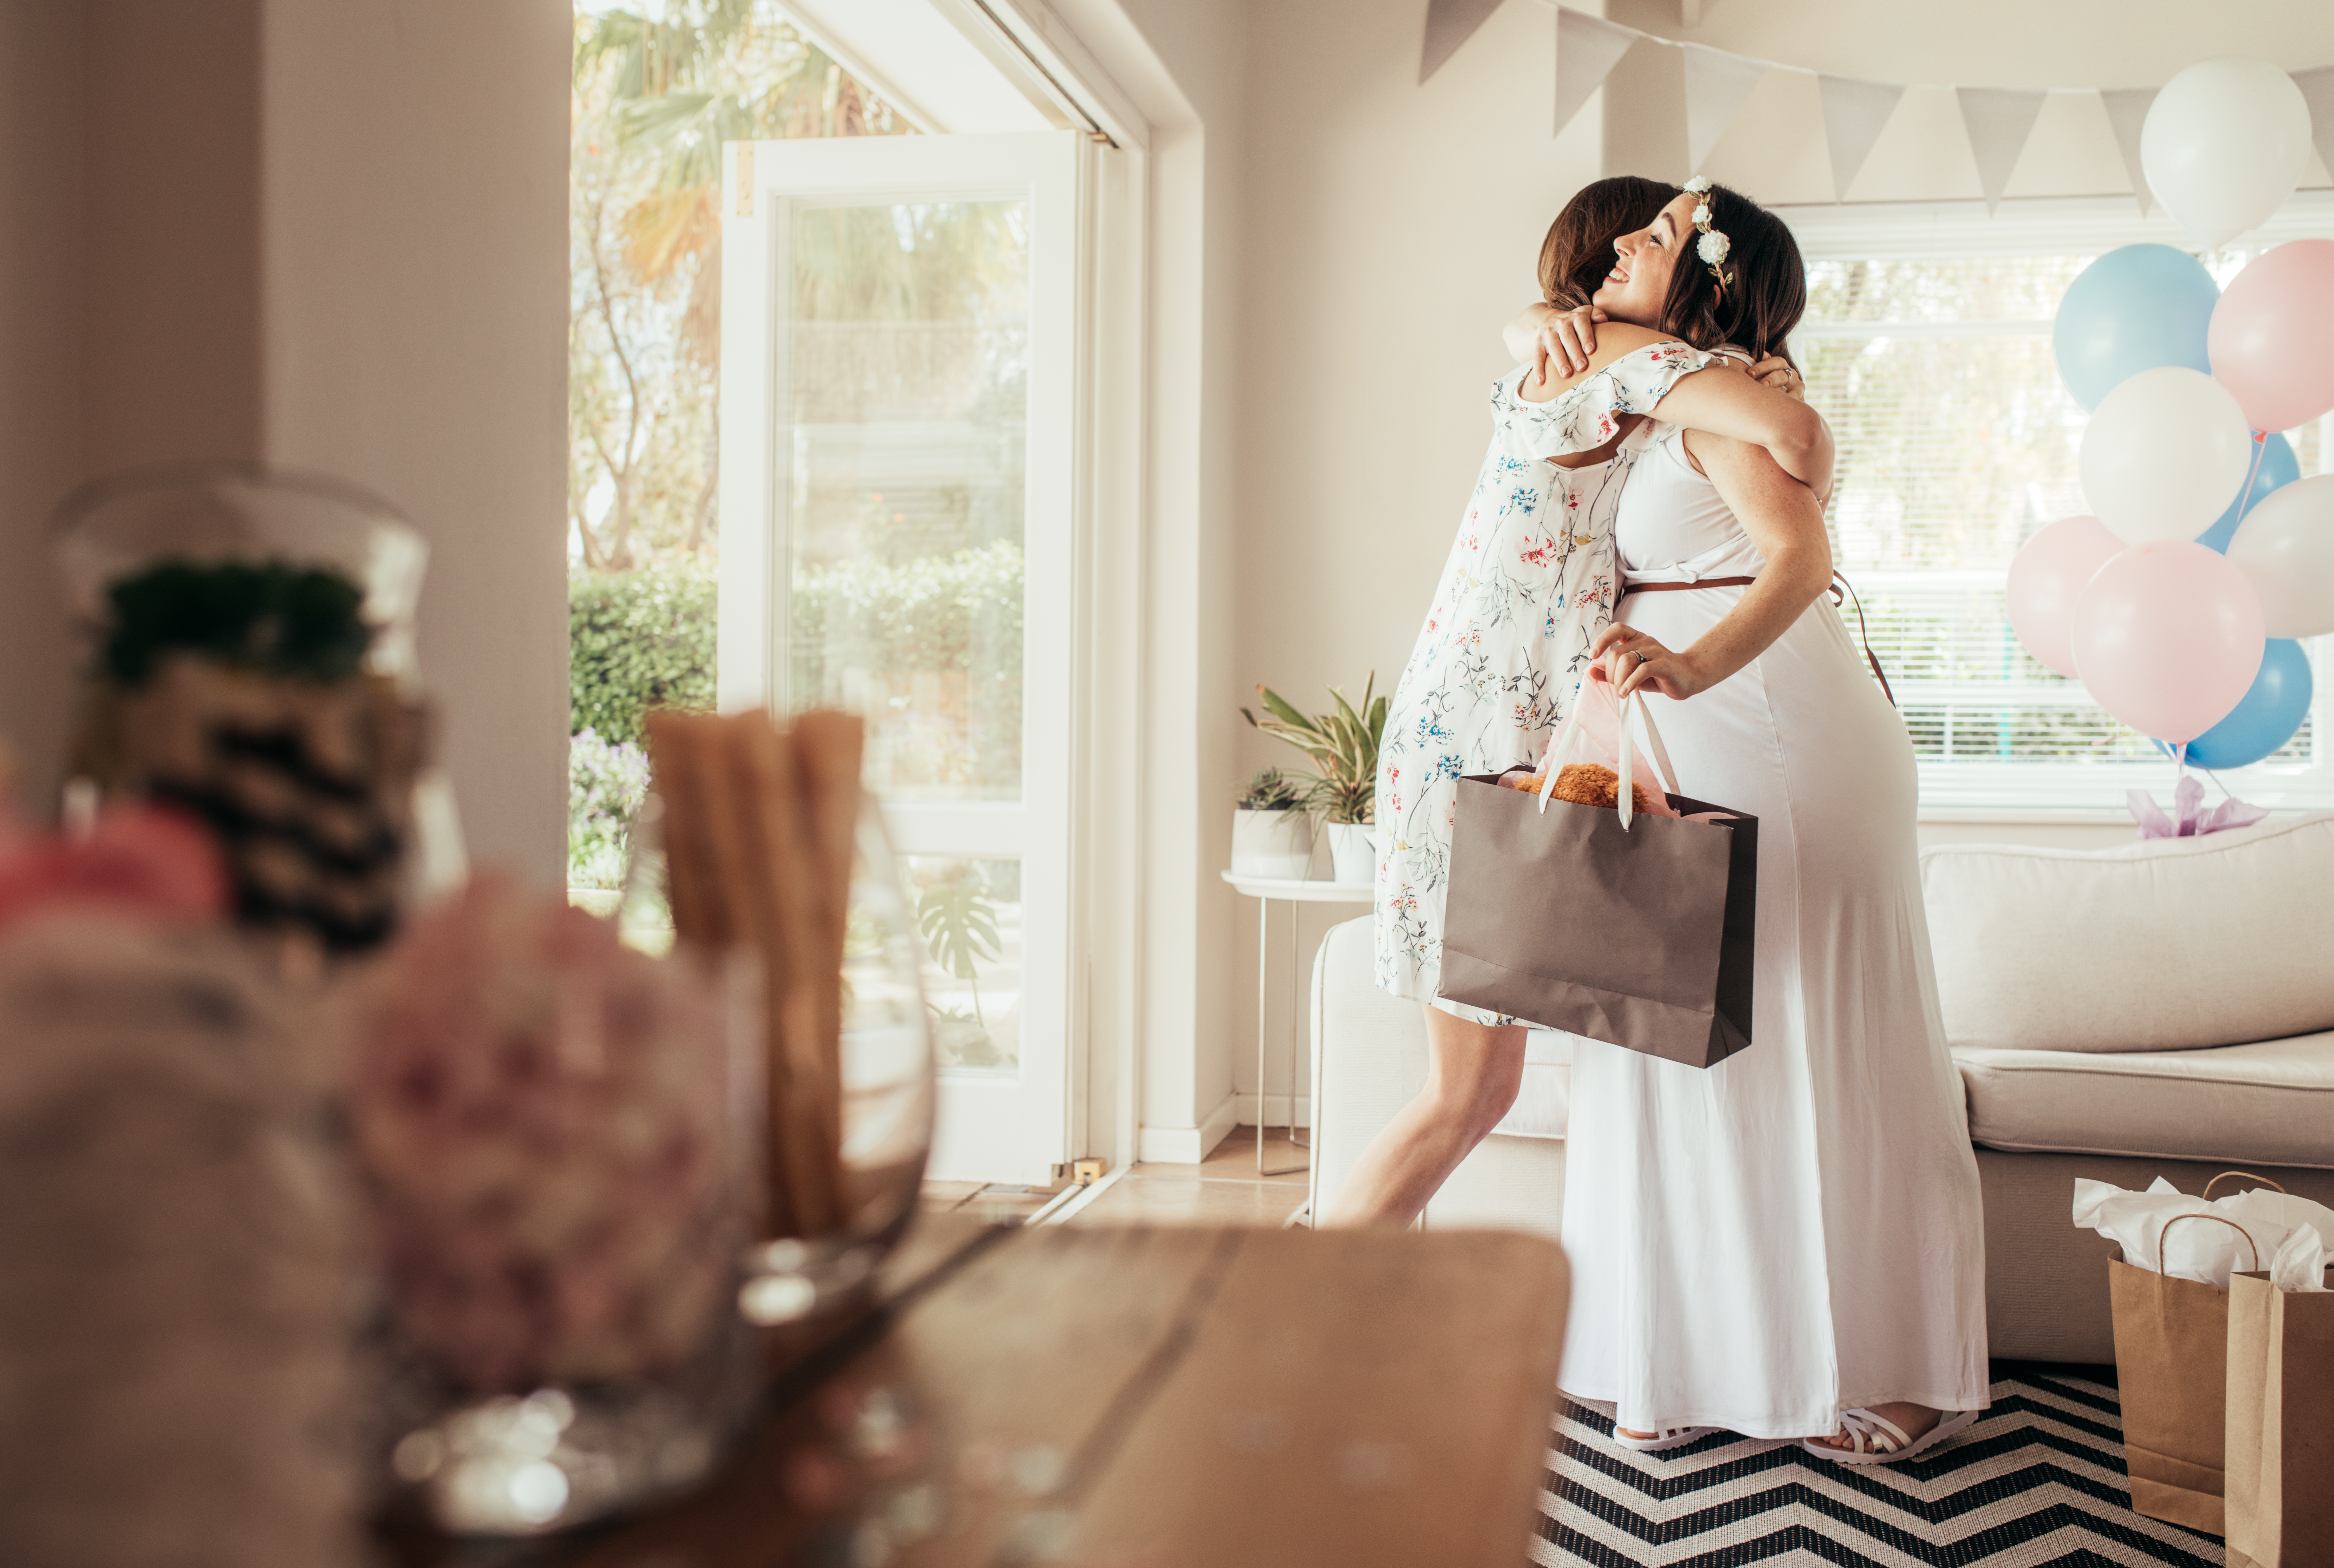 Woman hugging expecting mother at baby shower | Source: Shutterstock